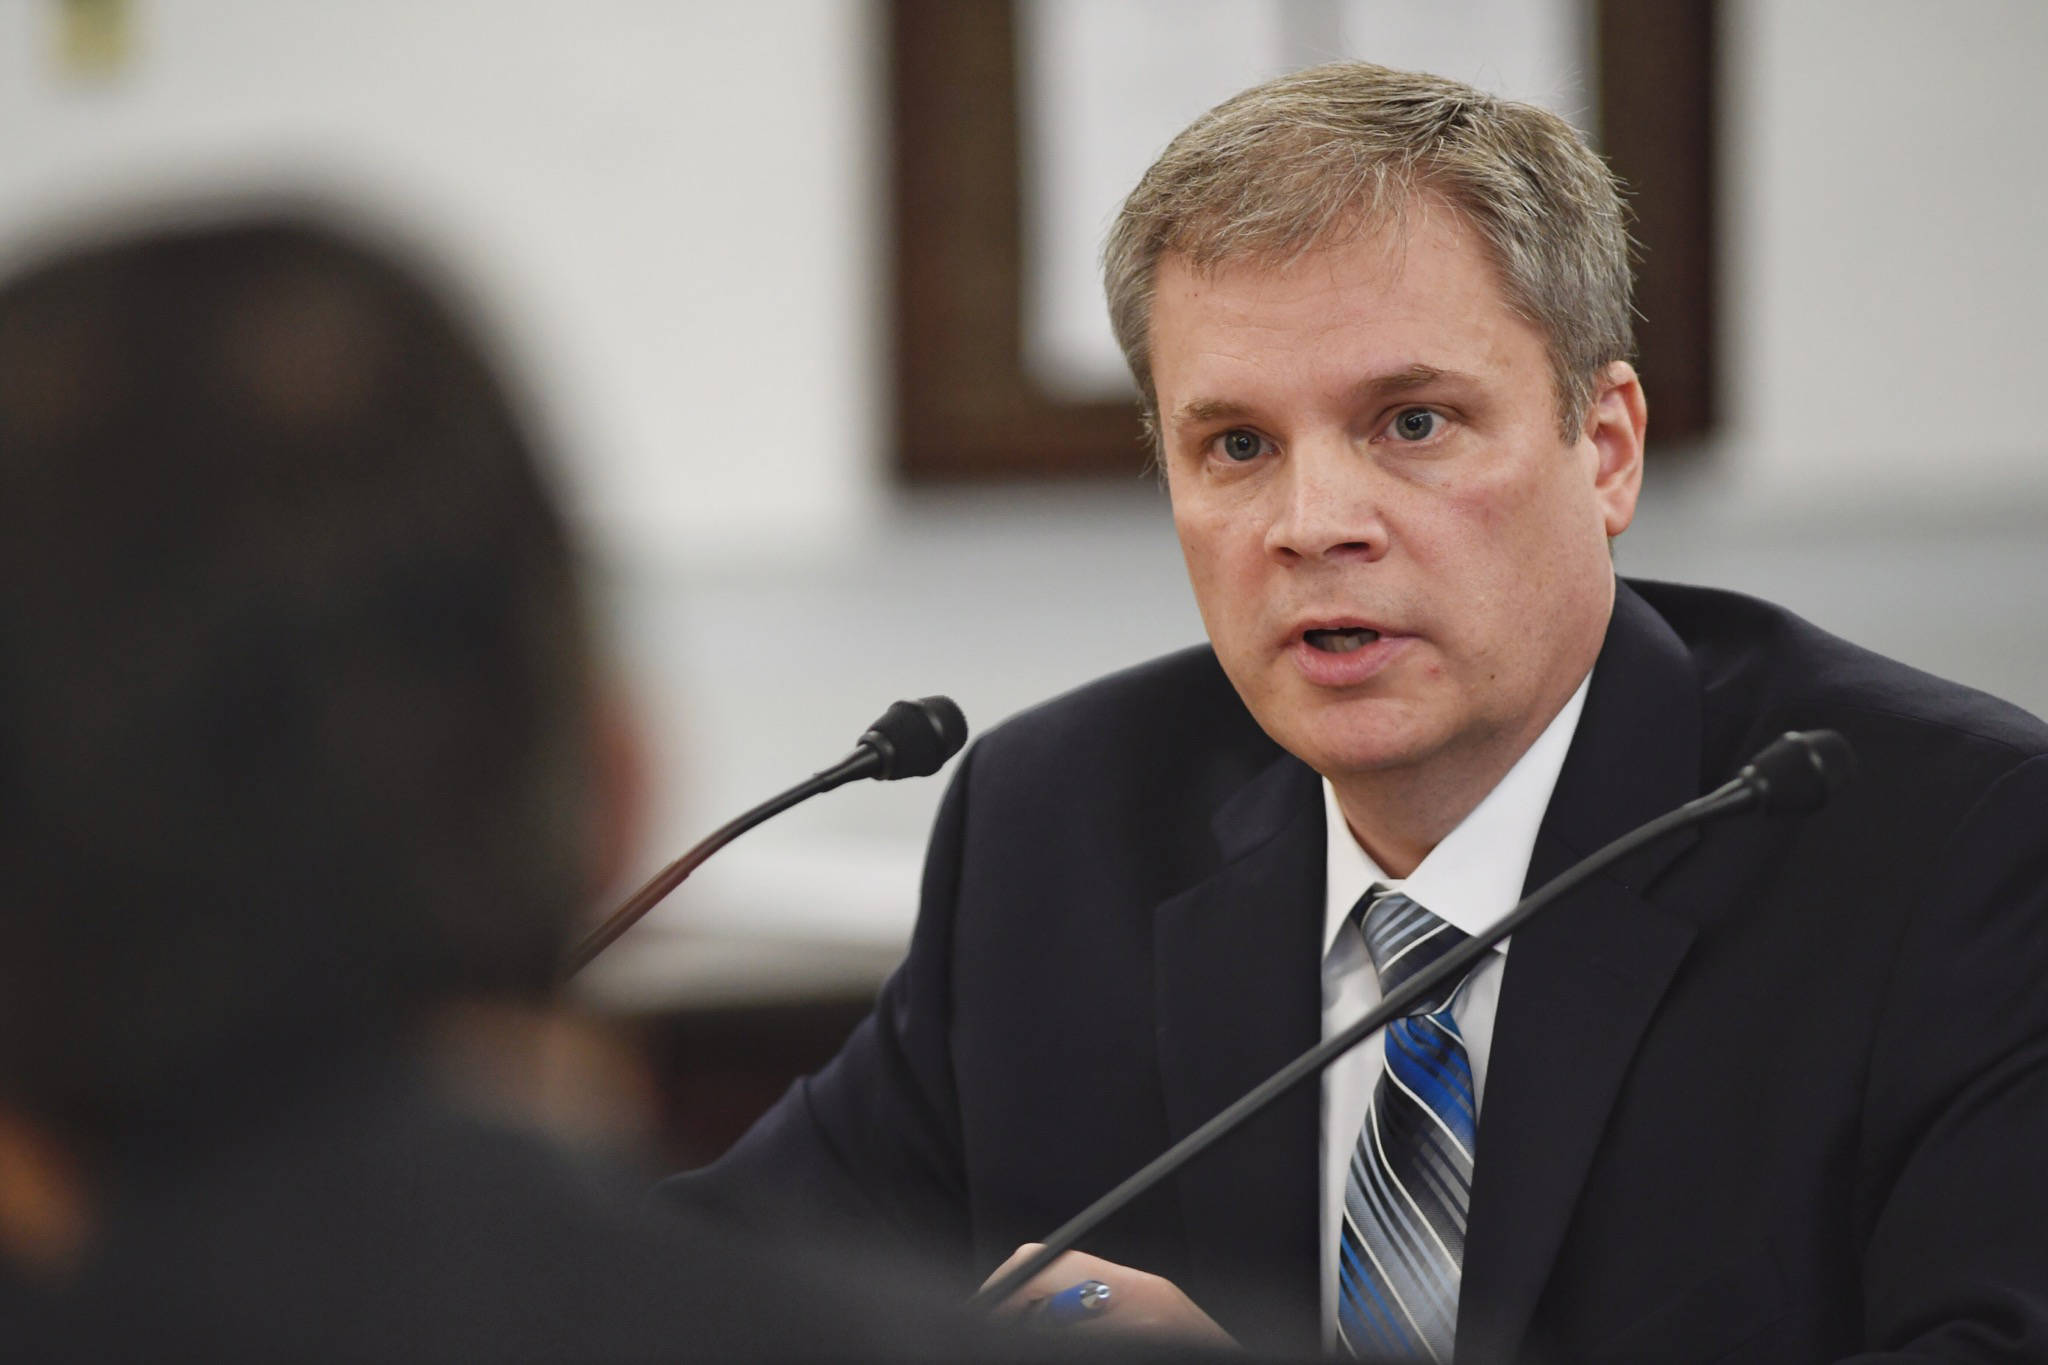 Dr. Michael Johnson, Commissioner of Education and Early Development, is interviewed by members of the Senate Finance Committee at the Capitol on Wednesday, Feb. 6, 2019. Gov. Mike Dunleavy has chosen Dr. Johnson as a Lt. Governor successor if needed. (Michael Penn | Juneau Empire)